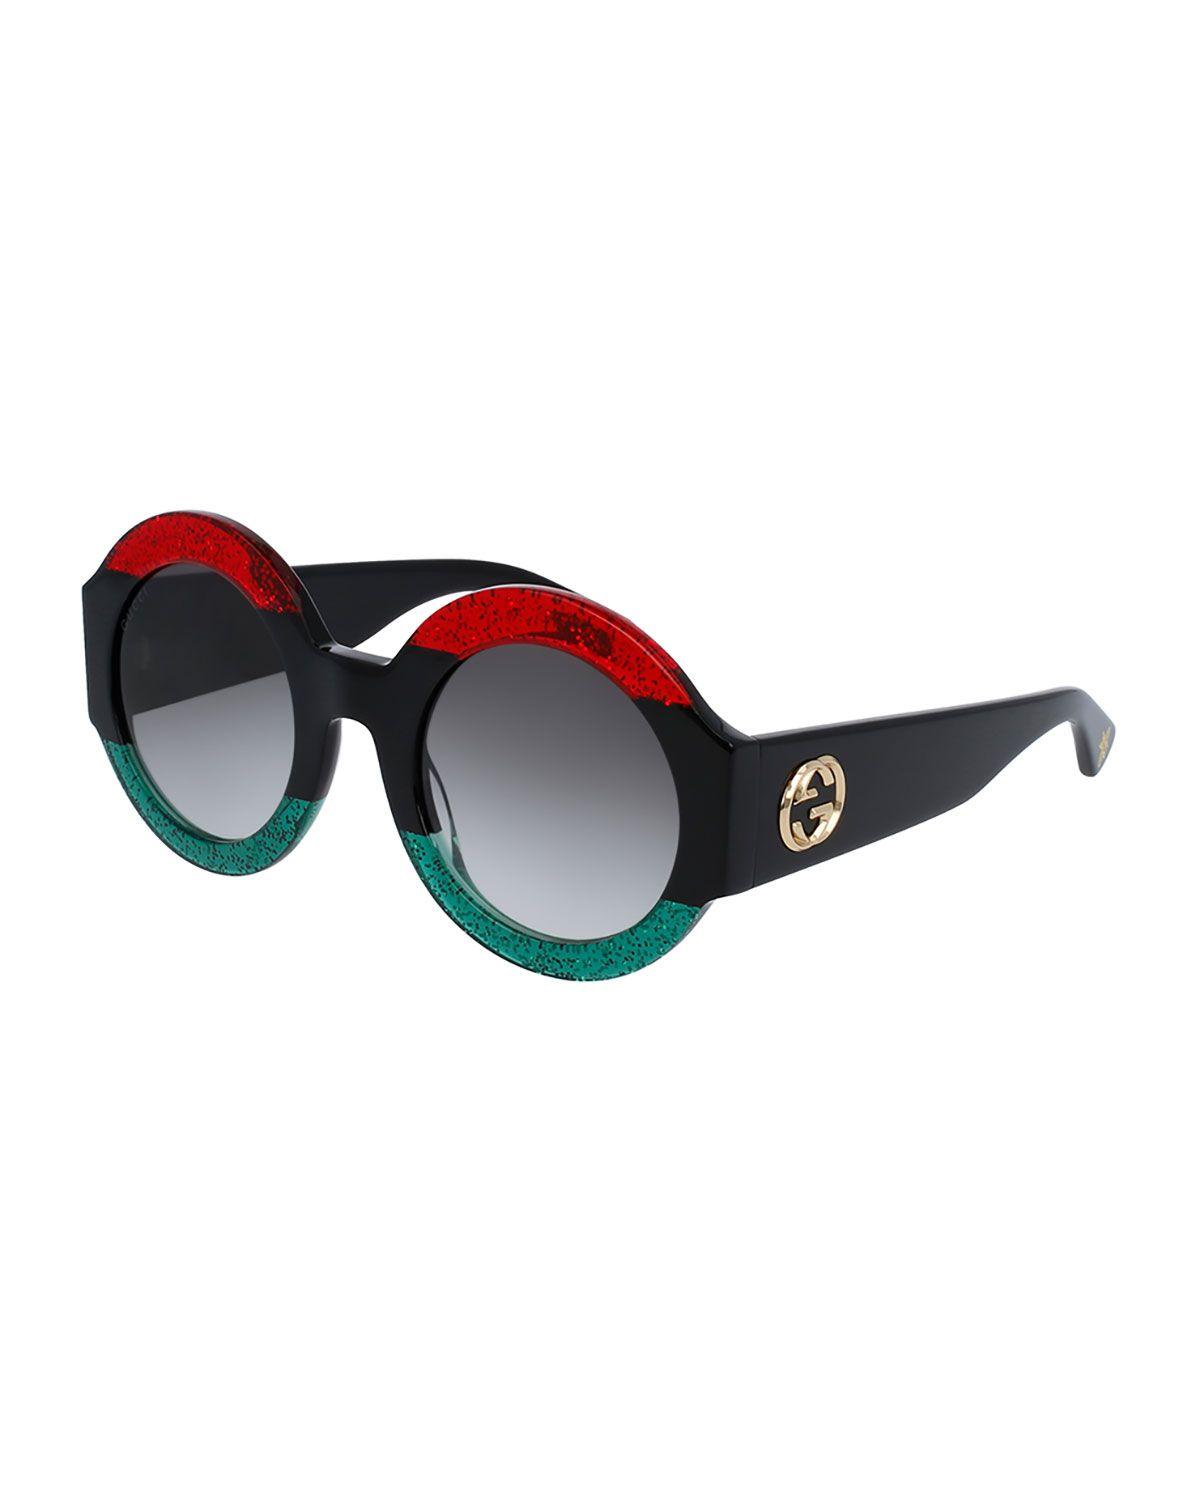 Red and Green Round Logo - Gucci Glittered Oversized Round Sunglasses, Red Green Black. Neiman